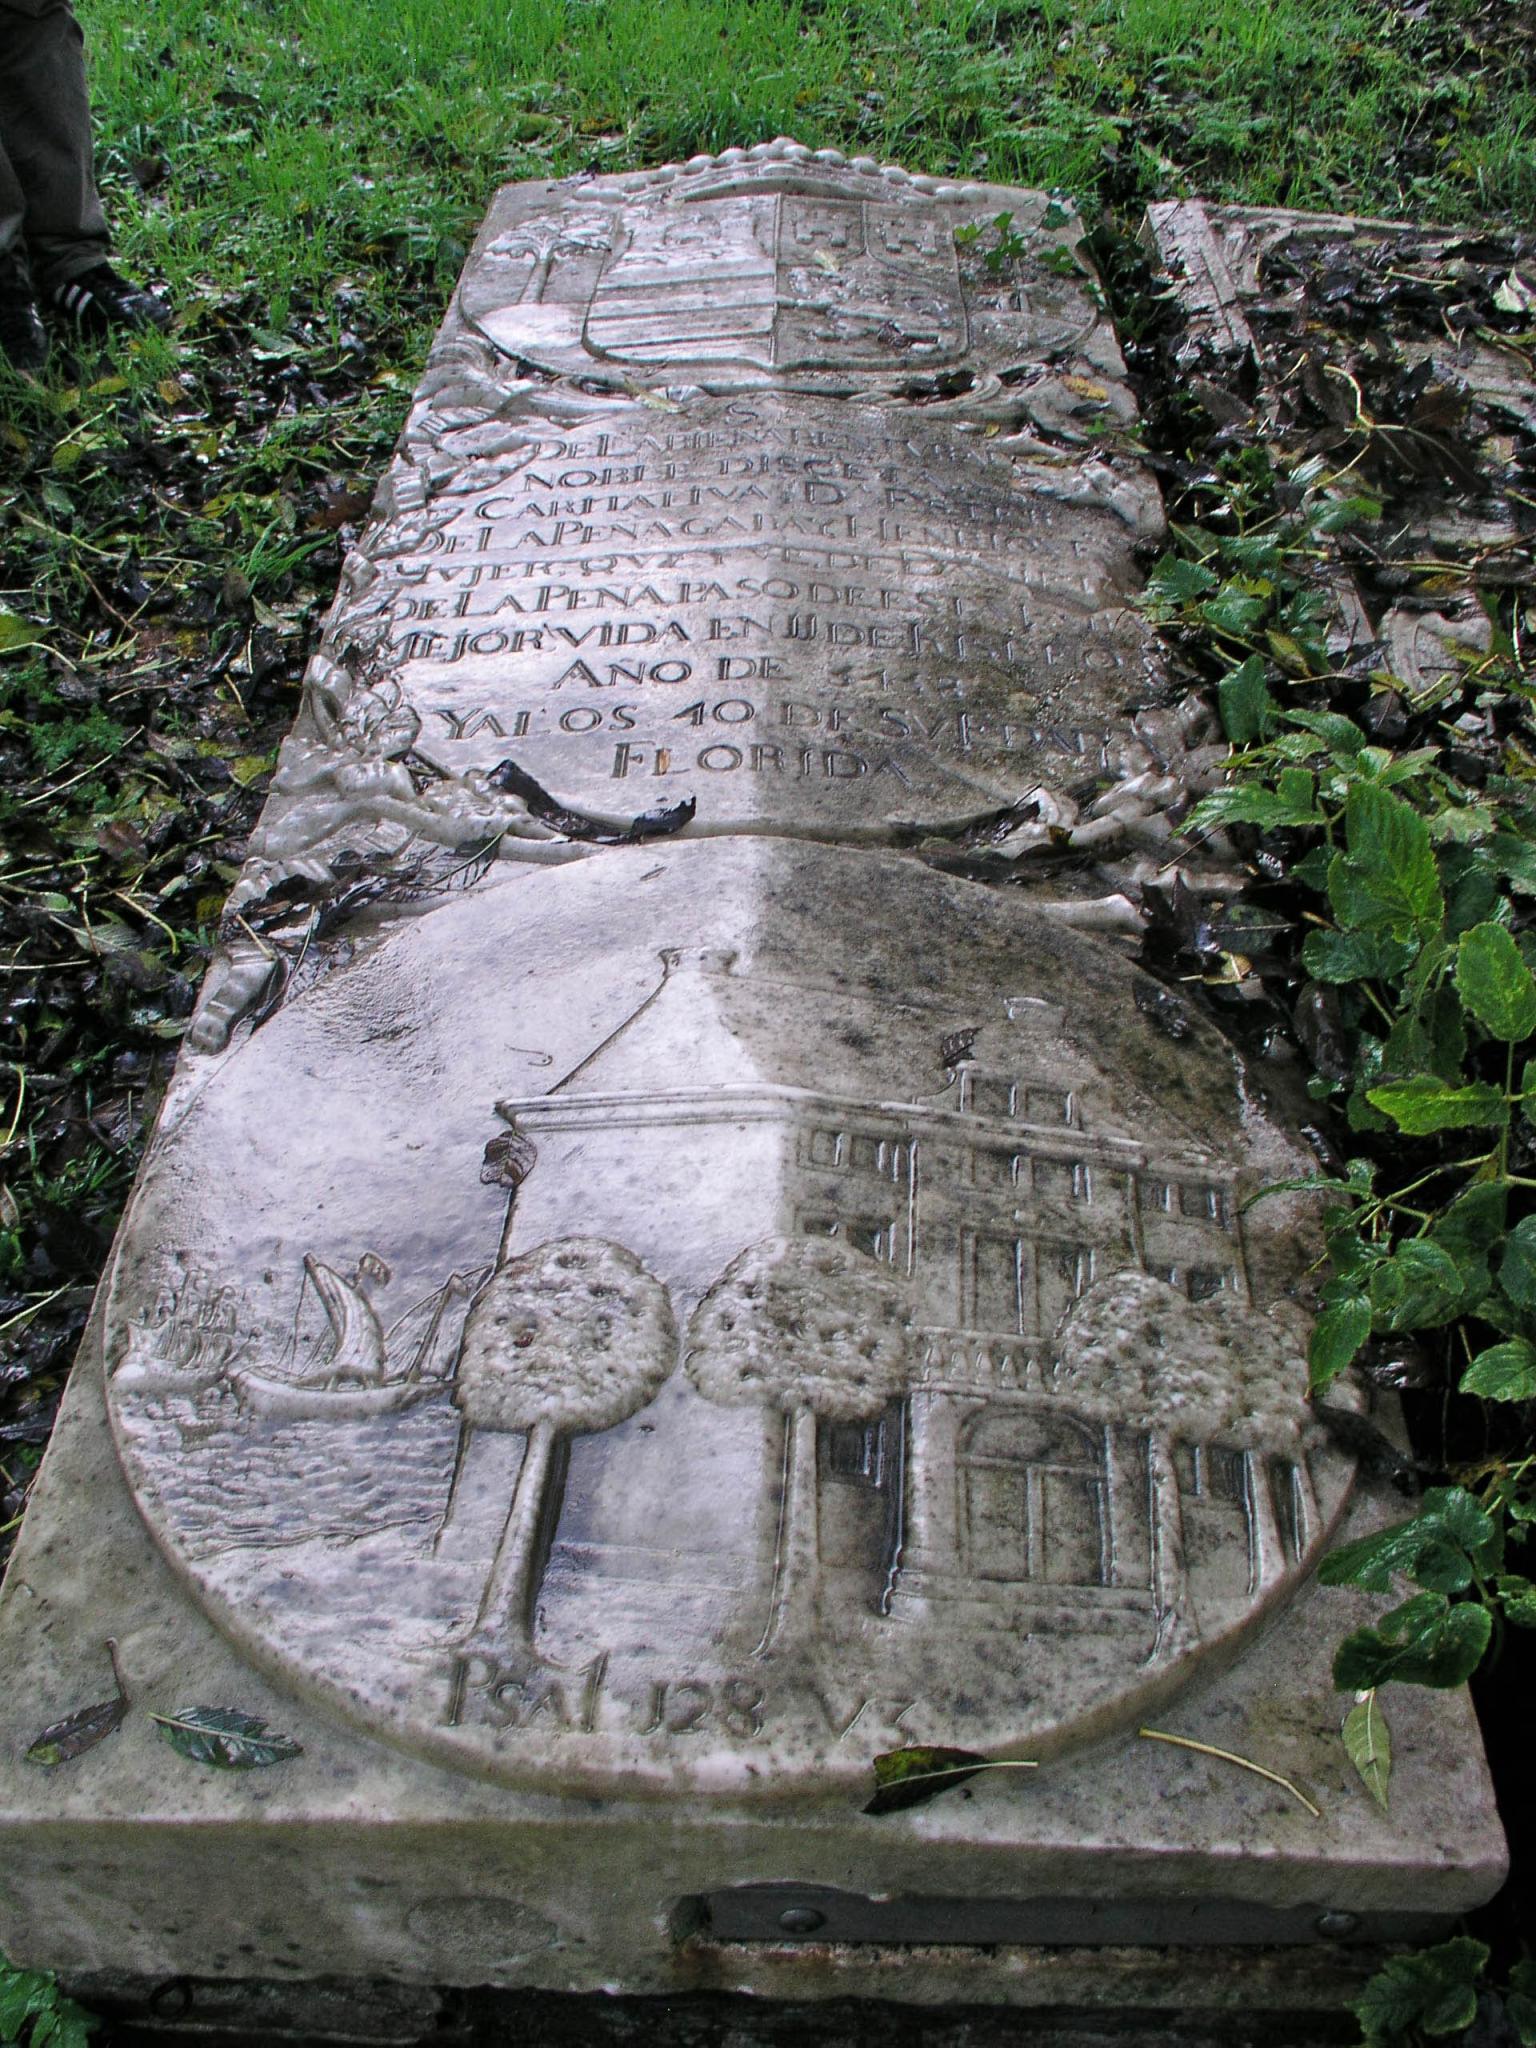 Tombstone flat on ground depicting coat of arms above Spanish inscription and relief of house surrounded by trees and next to sailboat.